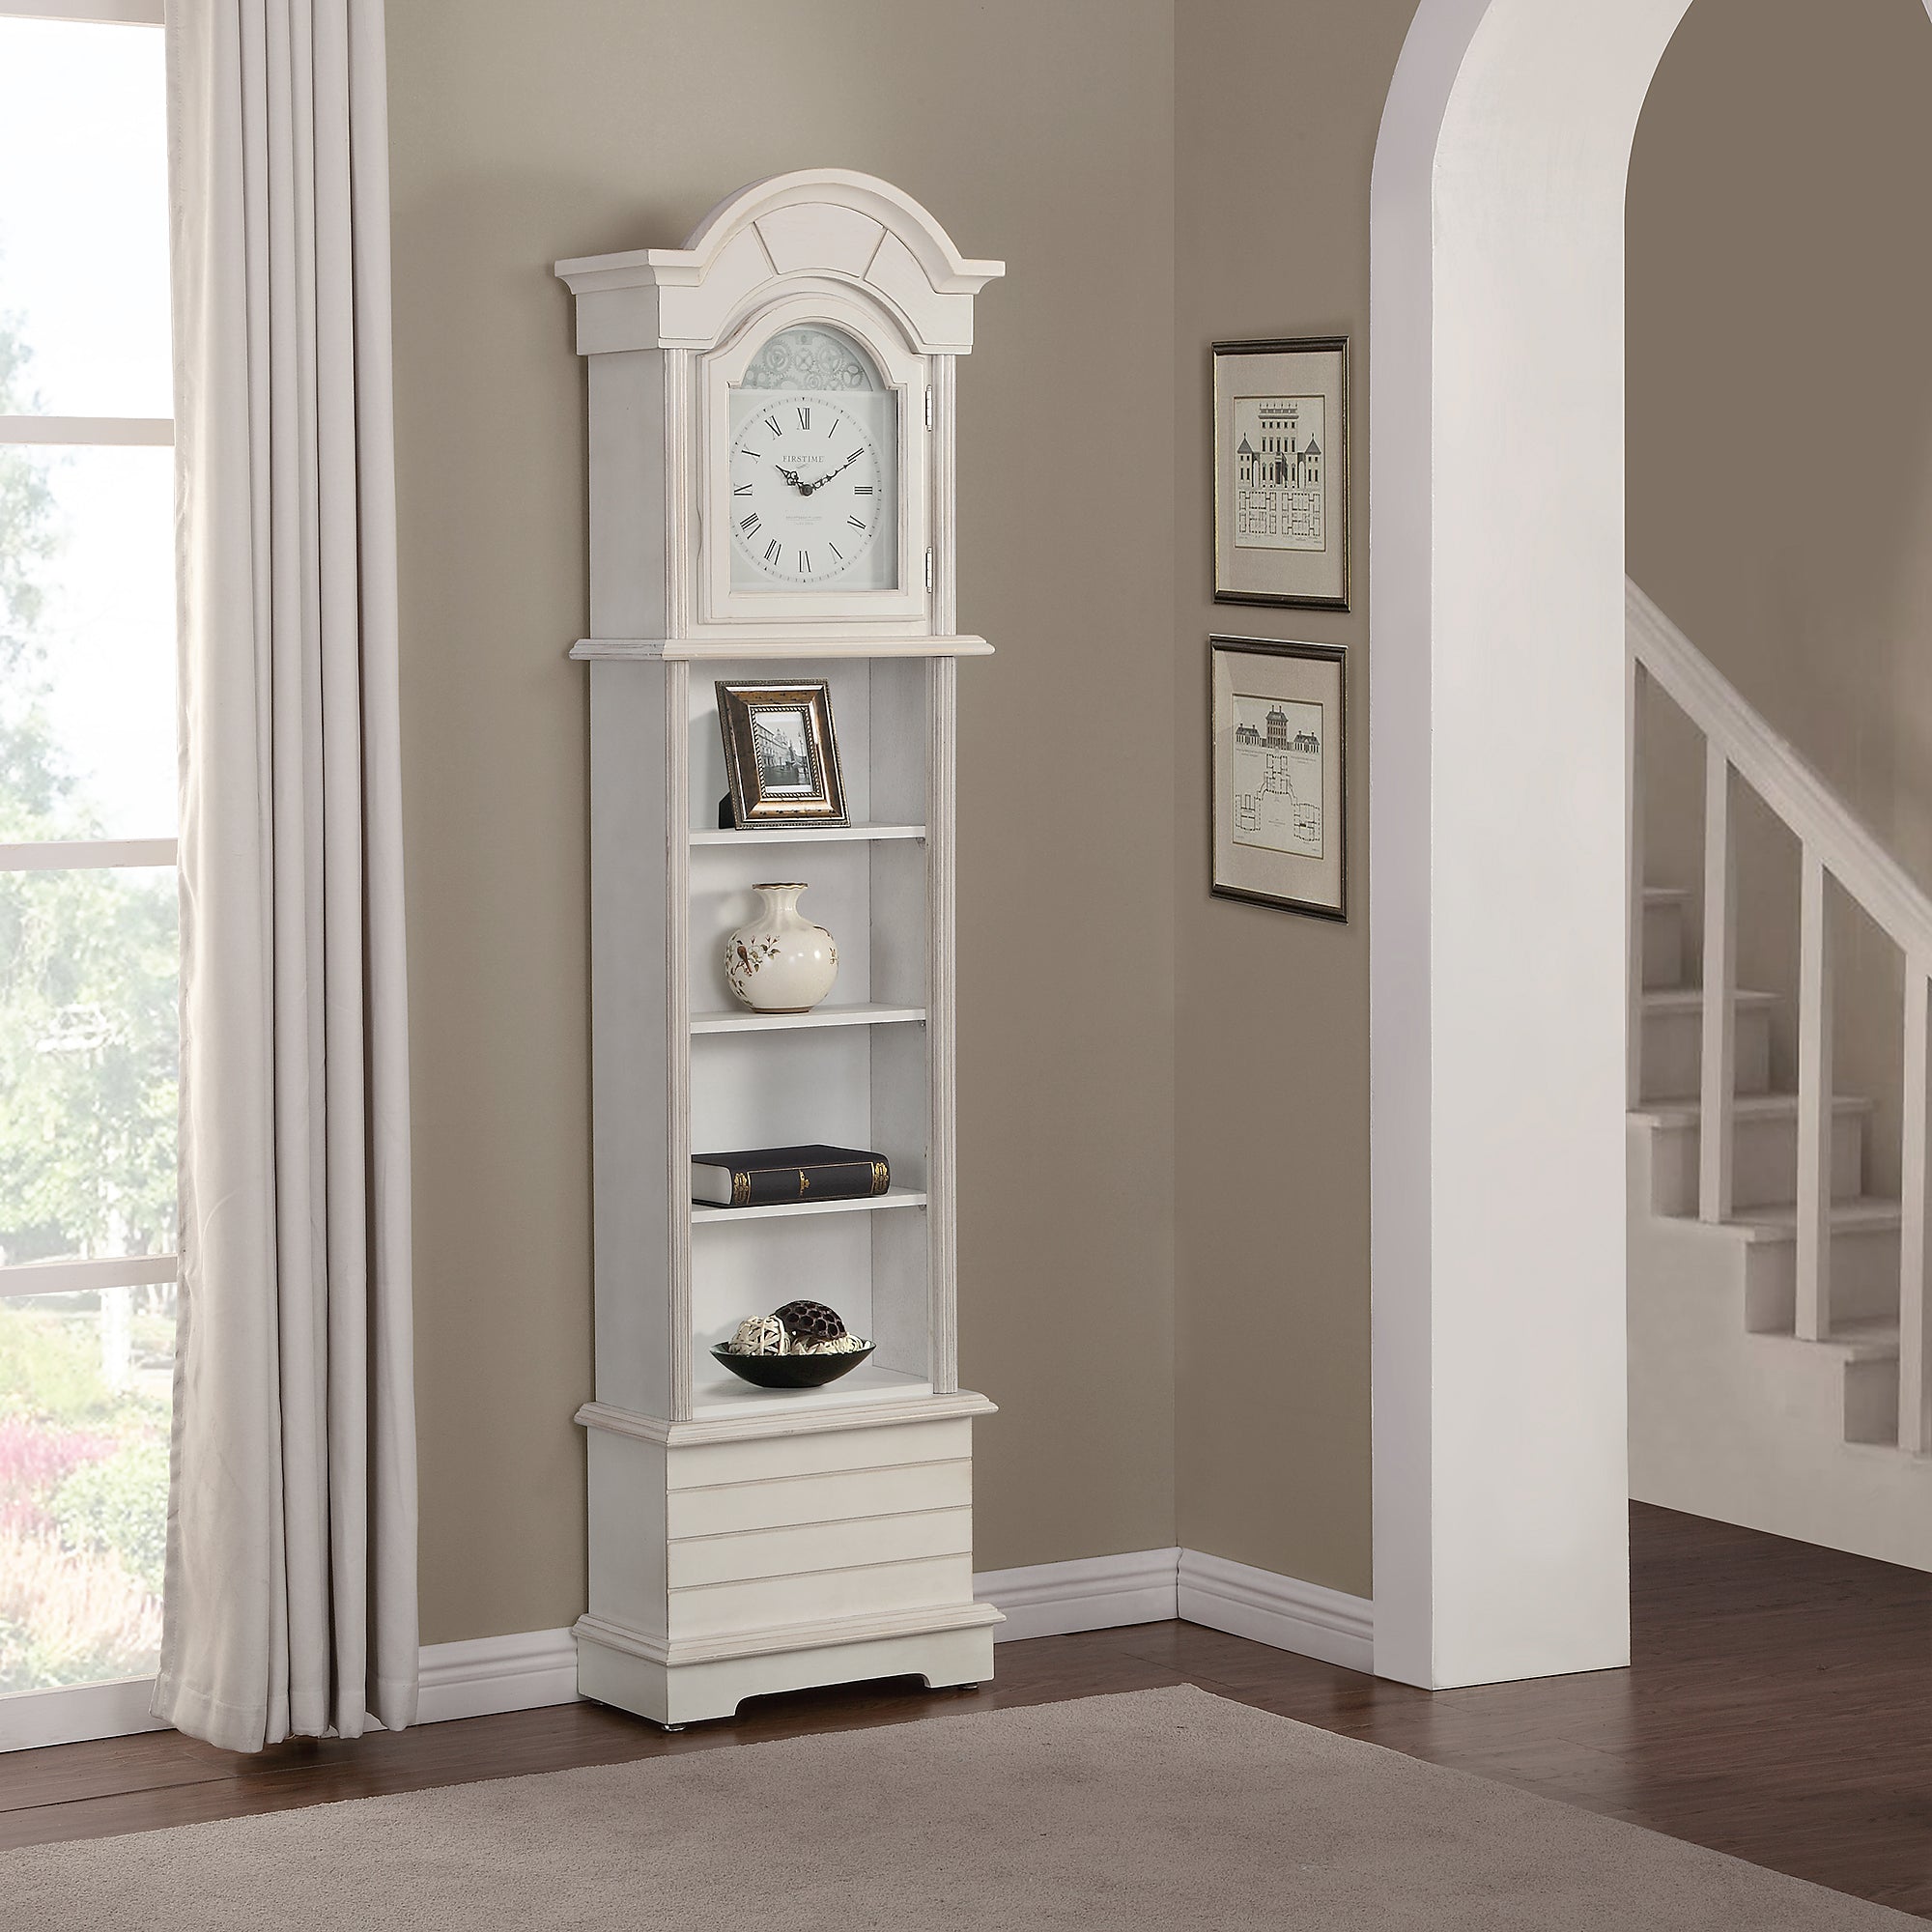 White grandfather clock with shelves